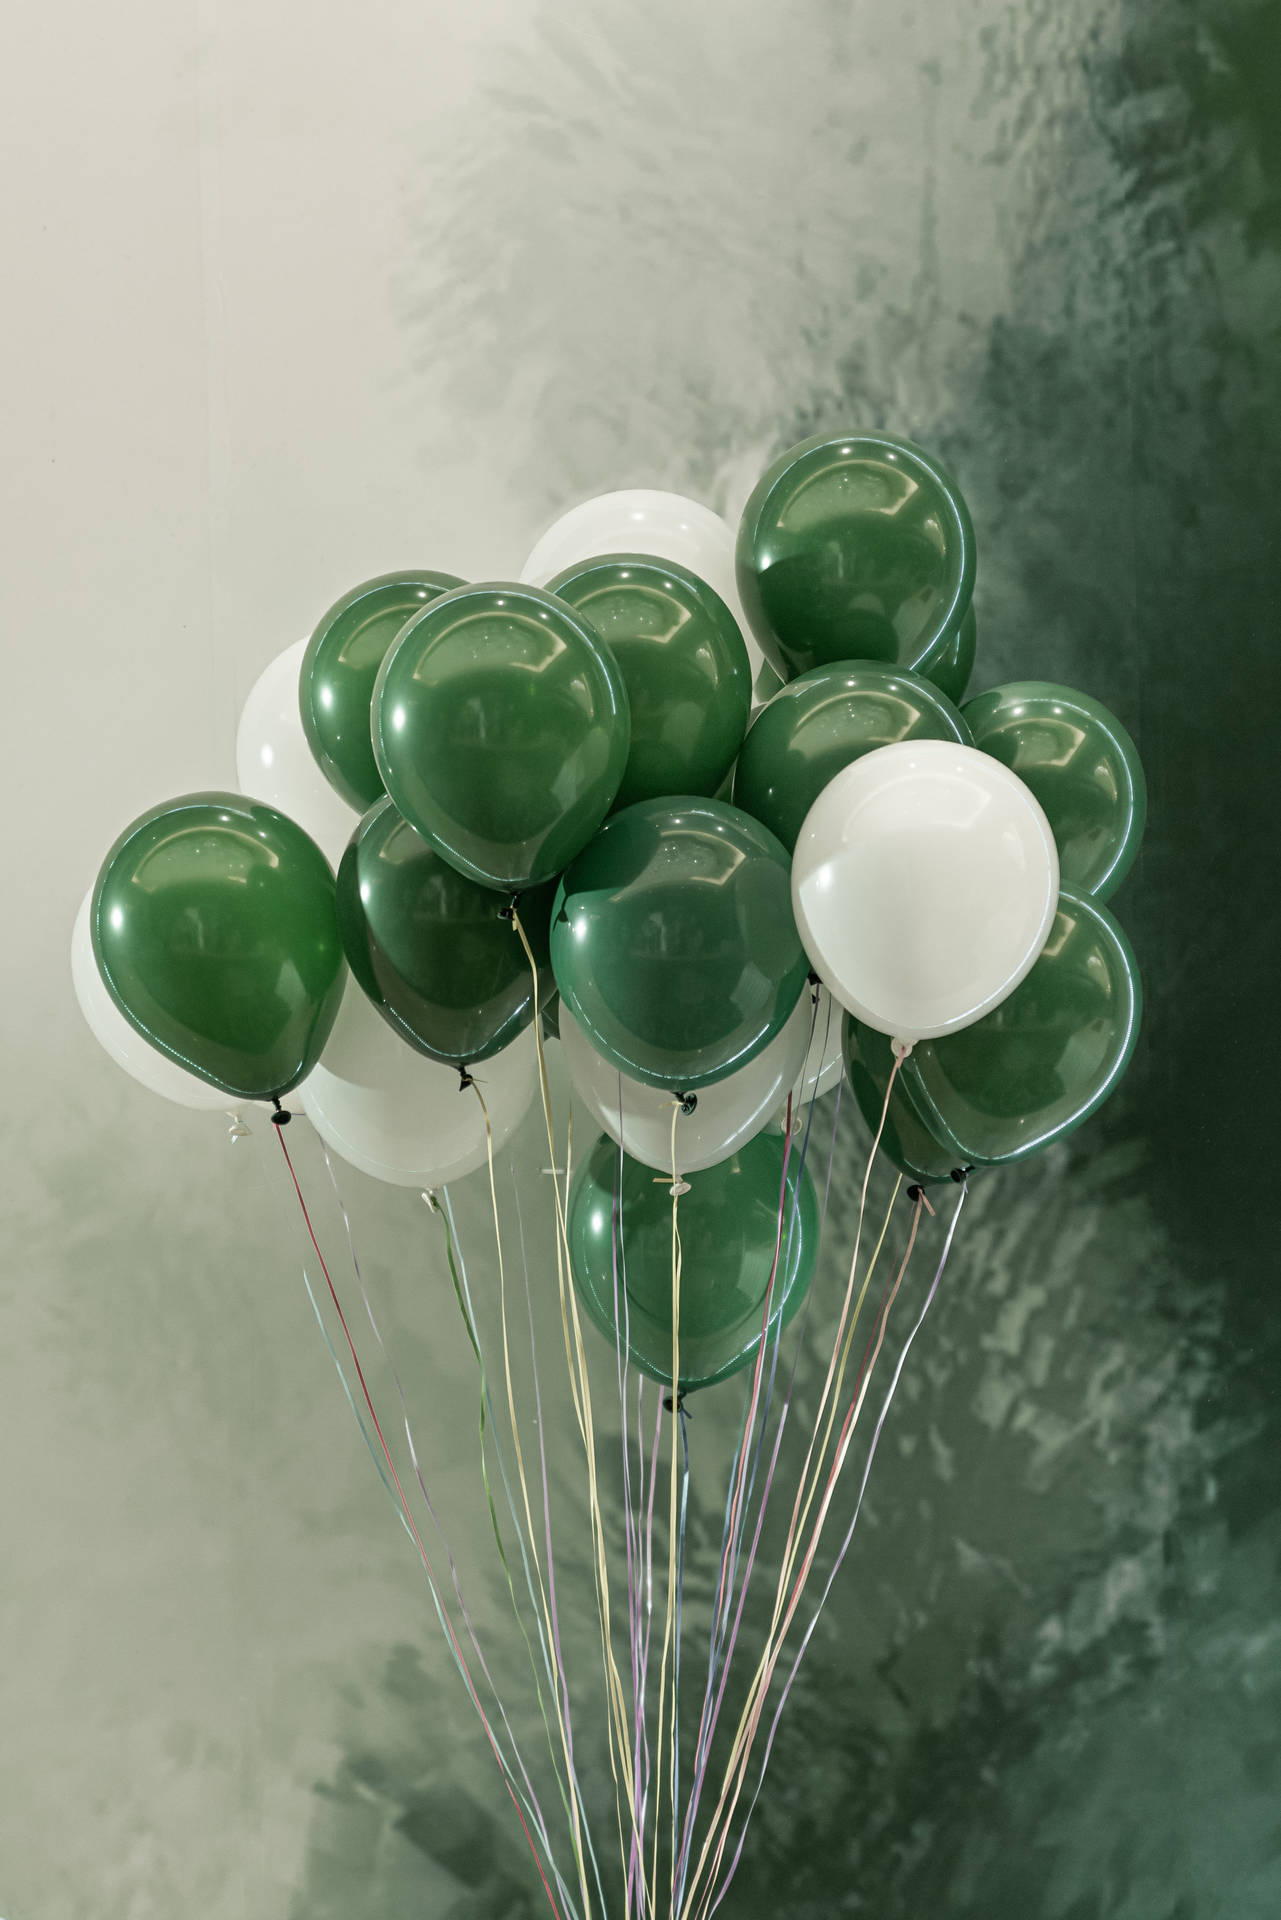 Glossy White Green Balloons Background